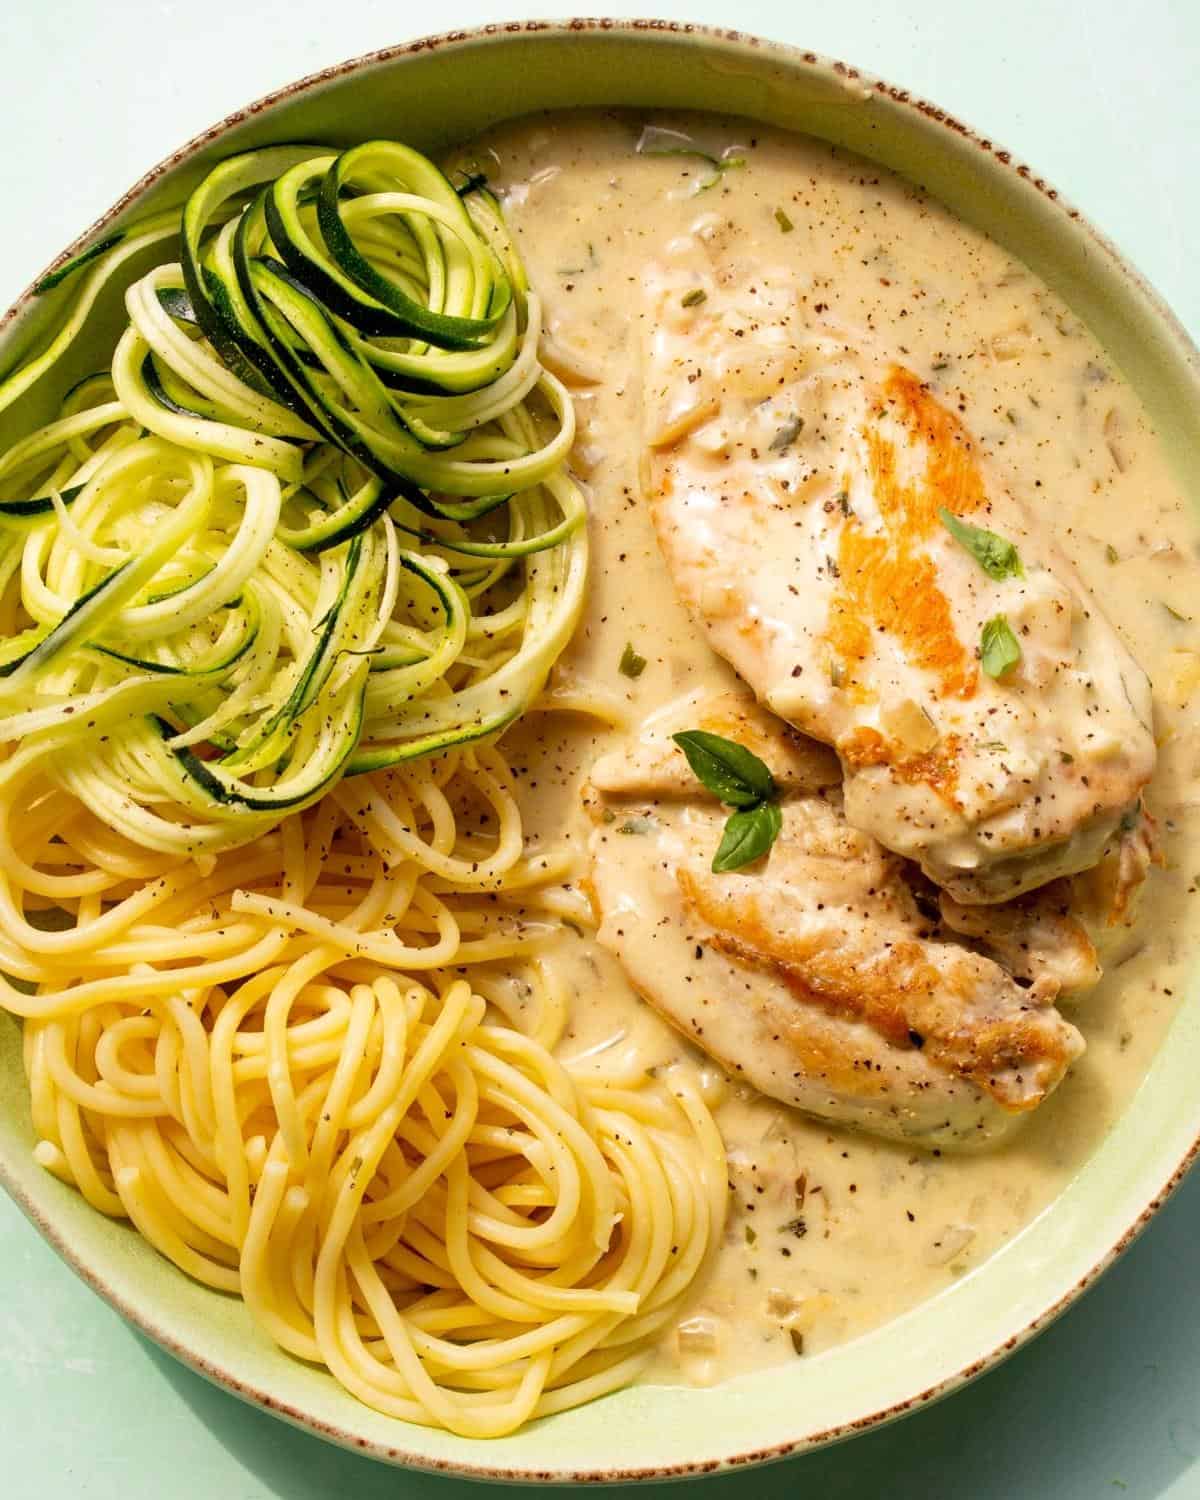 Creamy Philadelphia Chicken served with spaghetti and courgettie